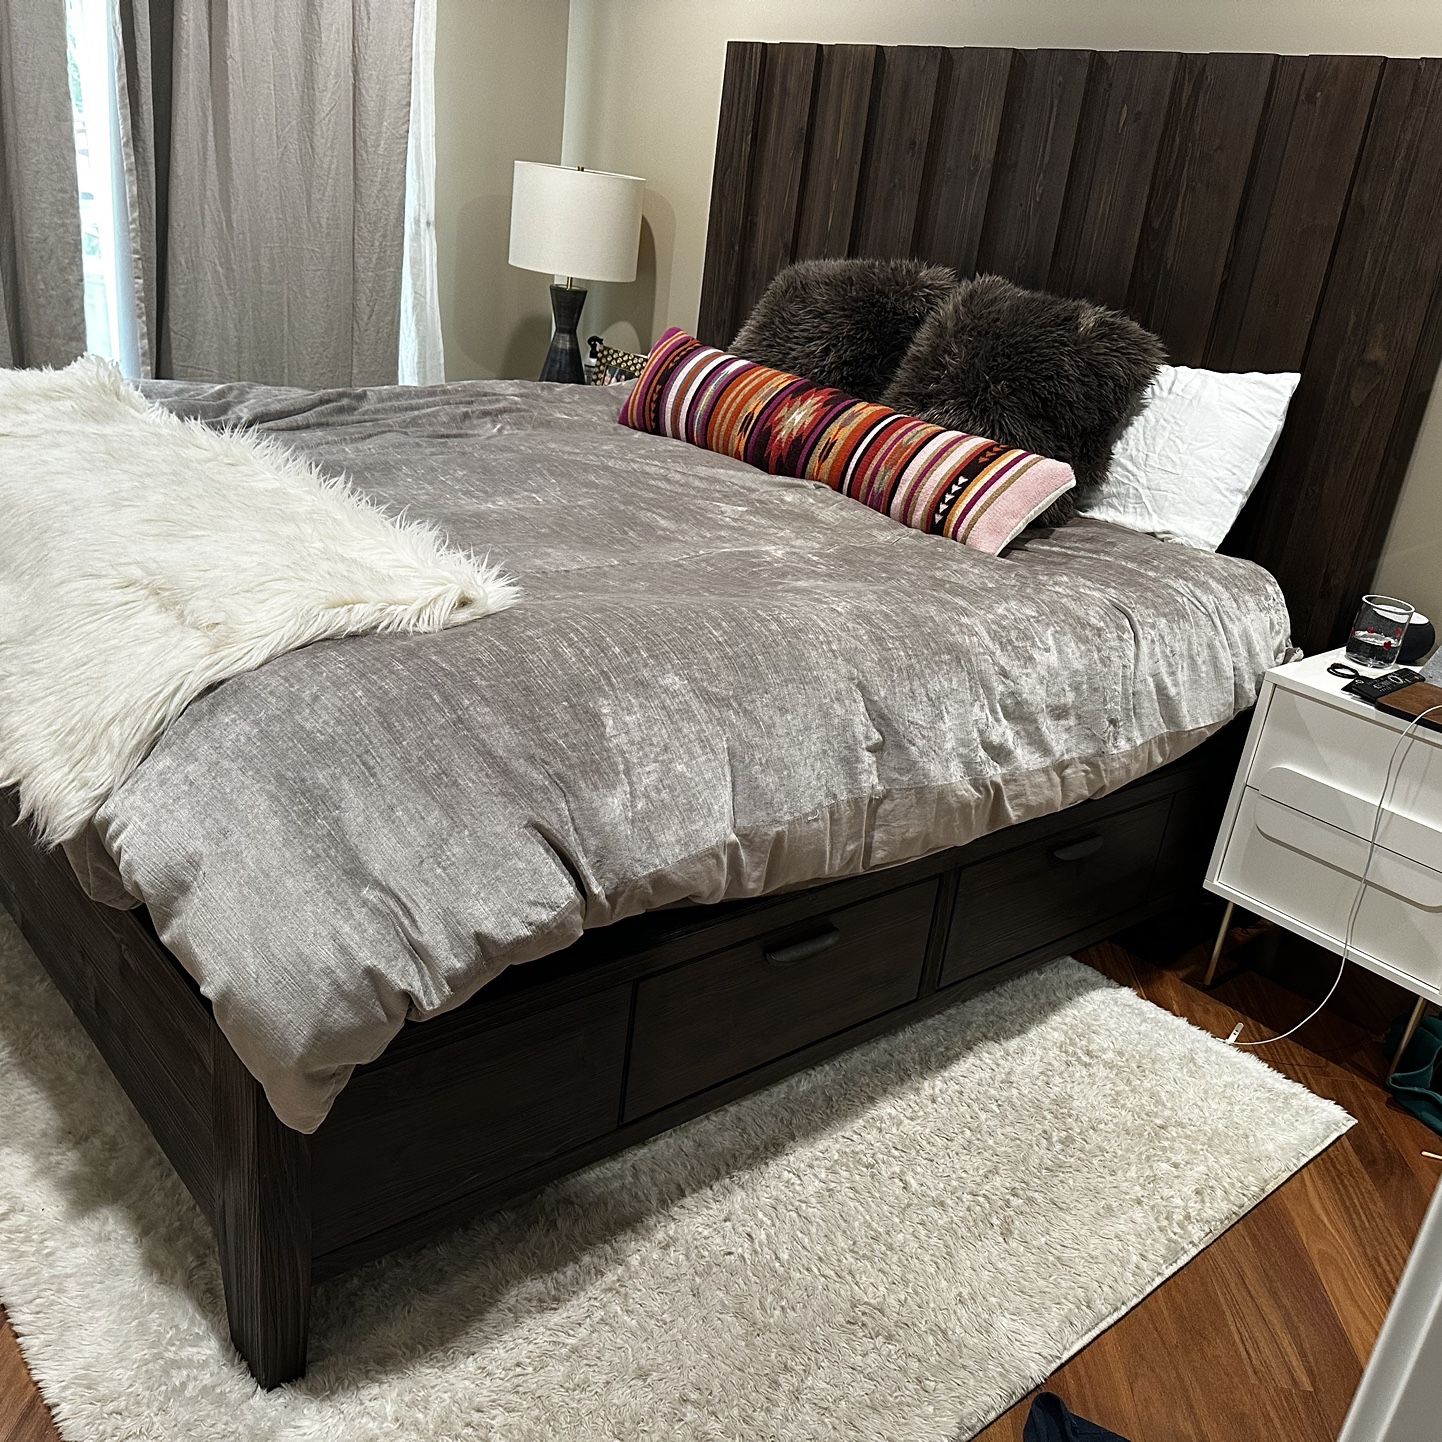 Kings Size Frame And Mattress - Hardly Used 